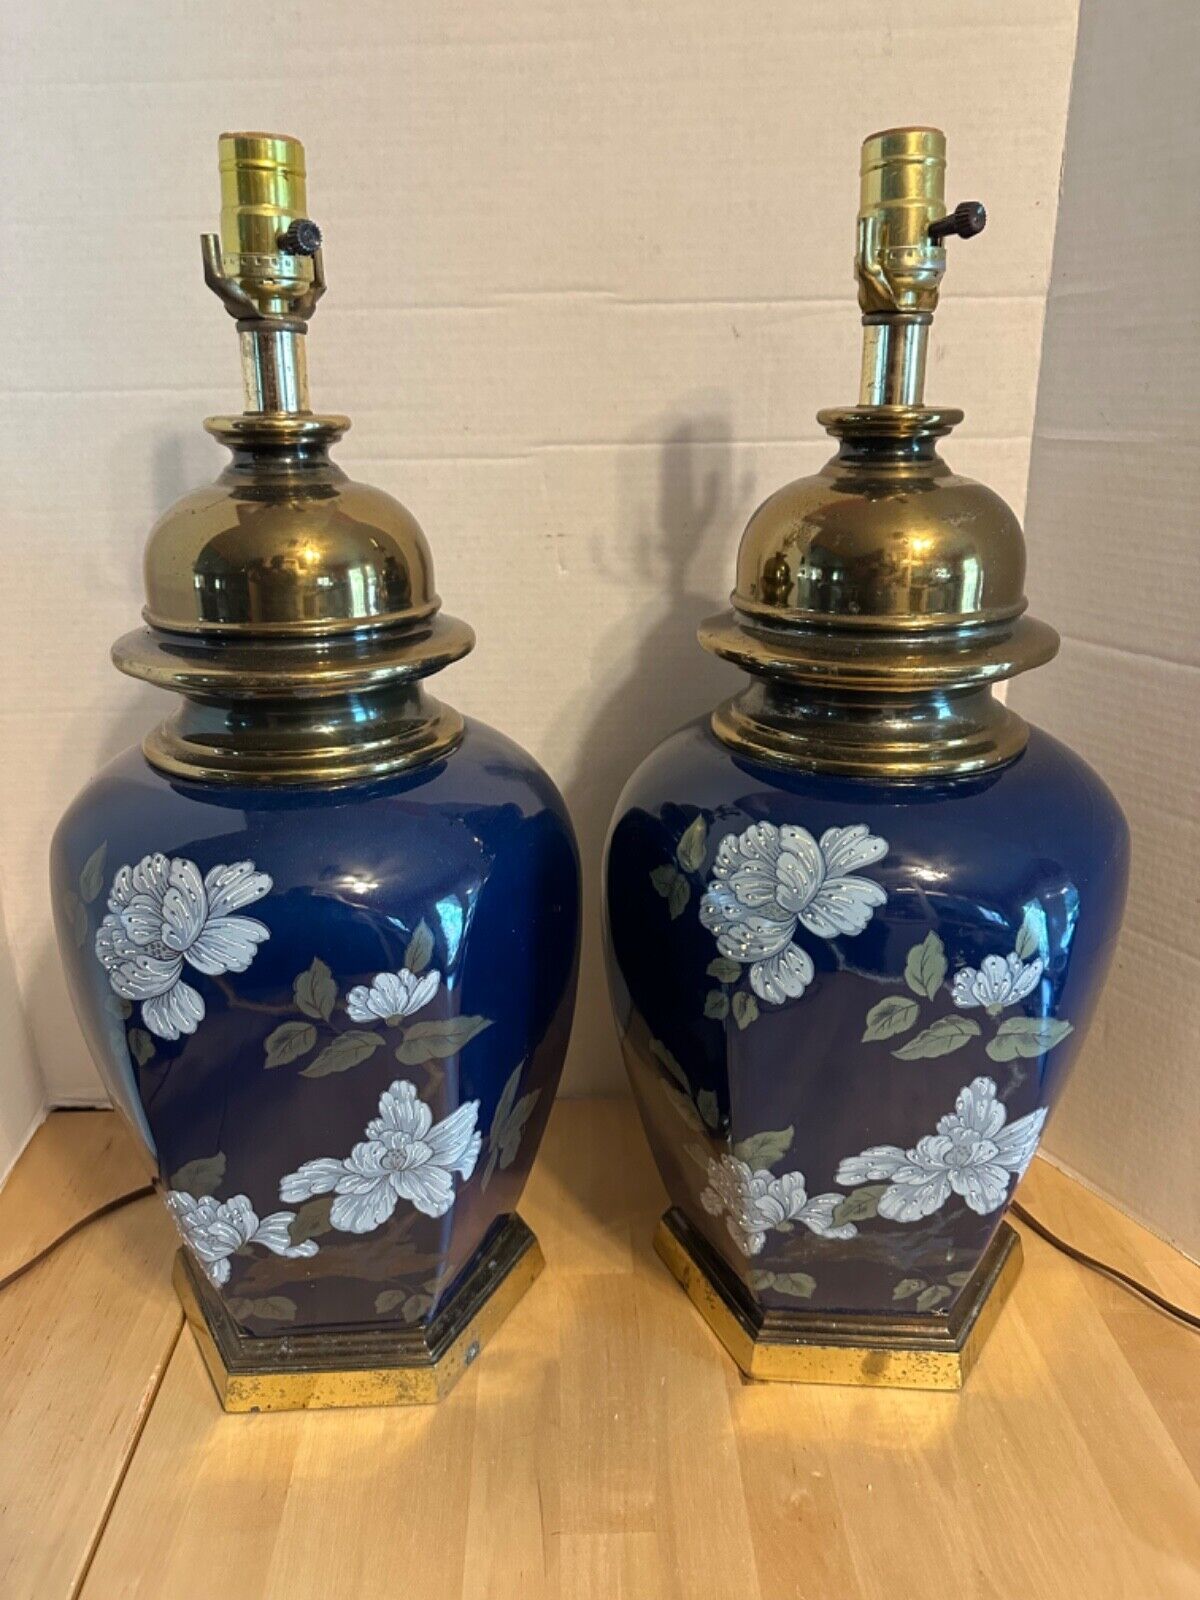 EXQUISITE PAIR EMBOSSED HAND PAINTED LAMPS FLORAL DESIGN BRASS